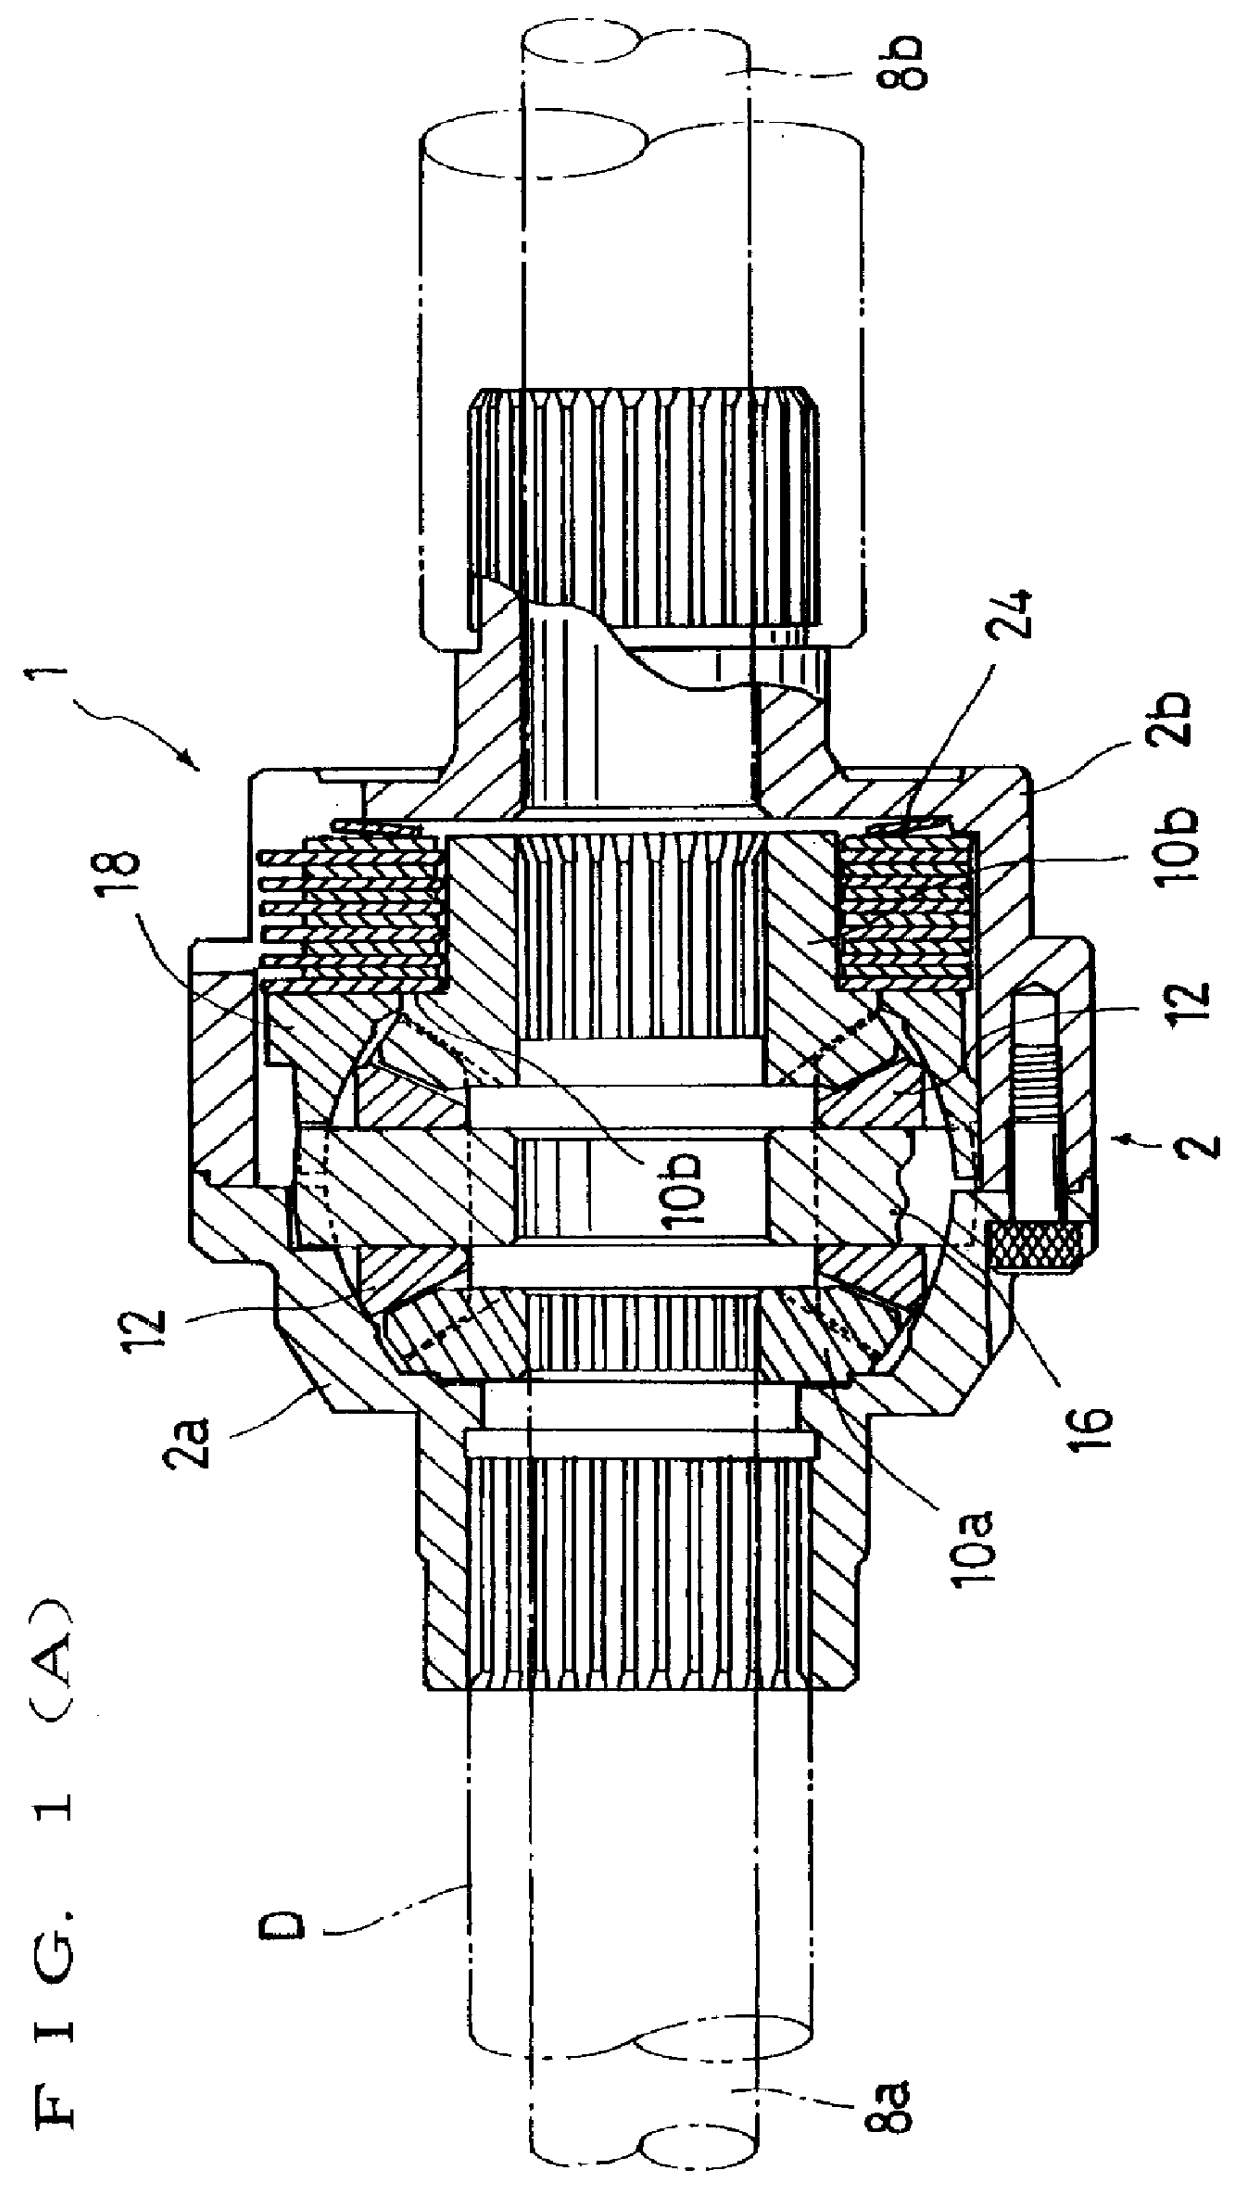 Limited slip differential gear